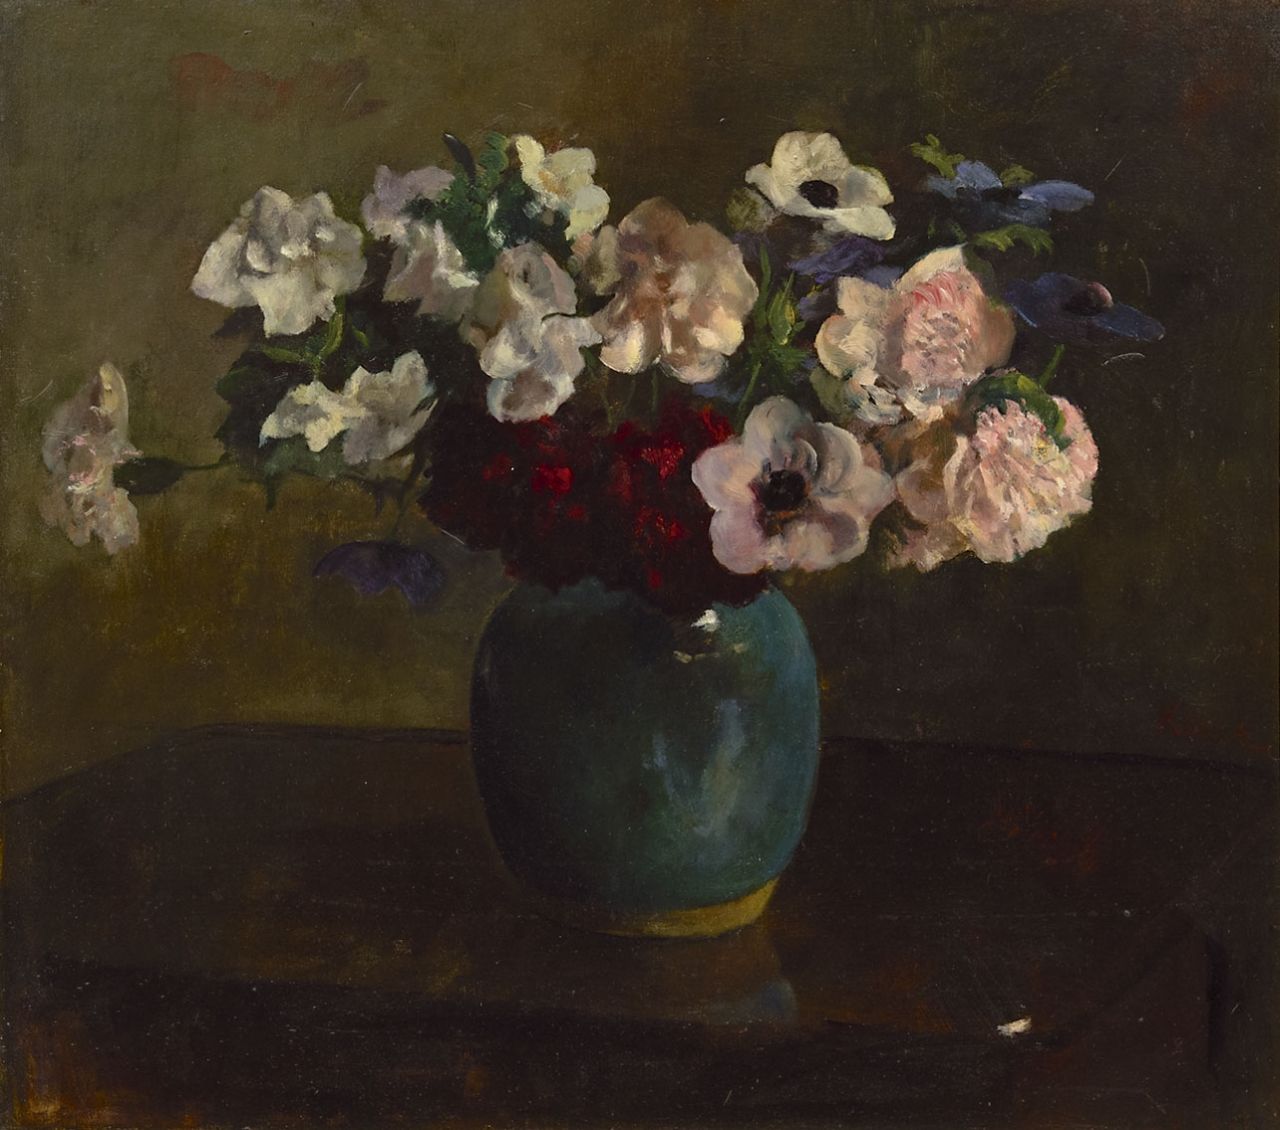 Kever J.S.H.  | Jacob Simon Hendrik 'Hein' Kever, Anemones and peonies in a blue vase, oil on canvas 57.4 x 63.3 cm, signed c.r.